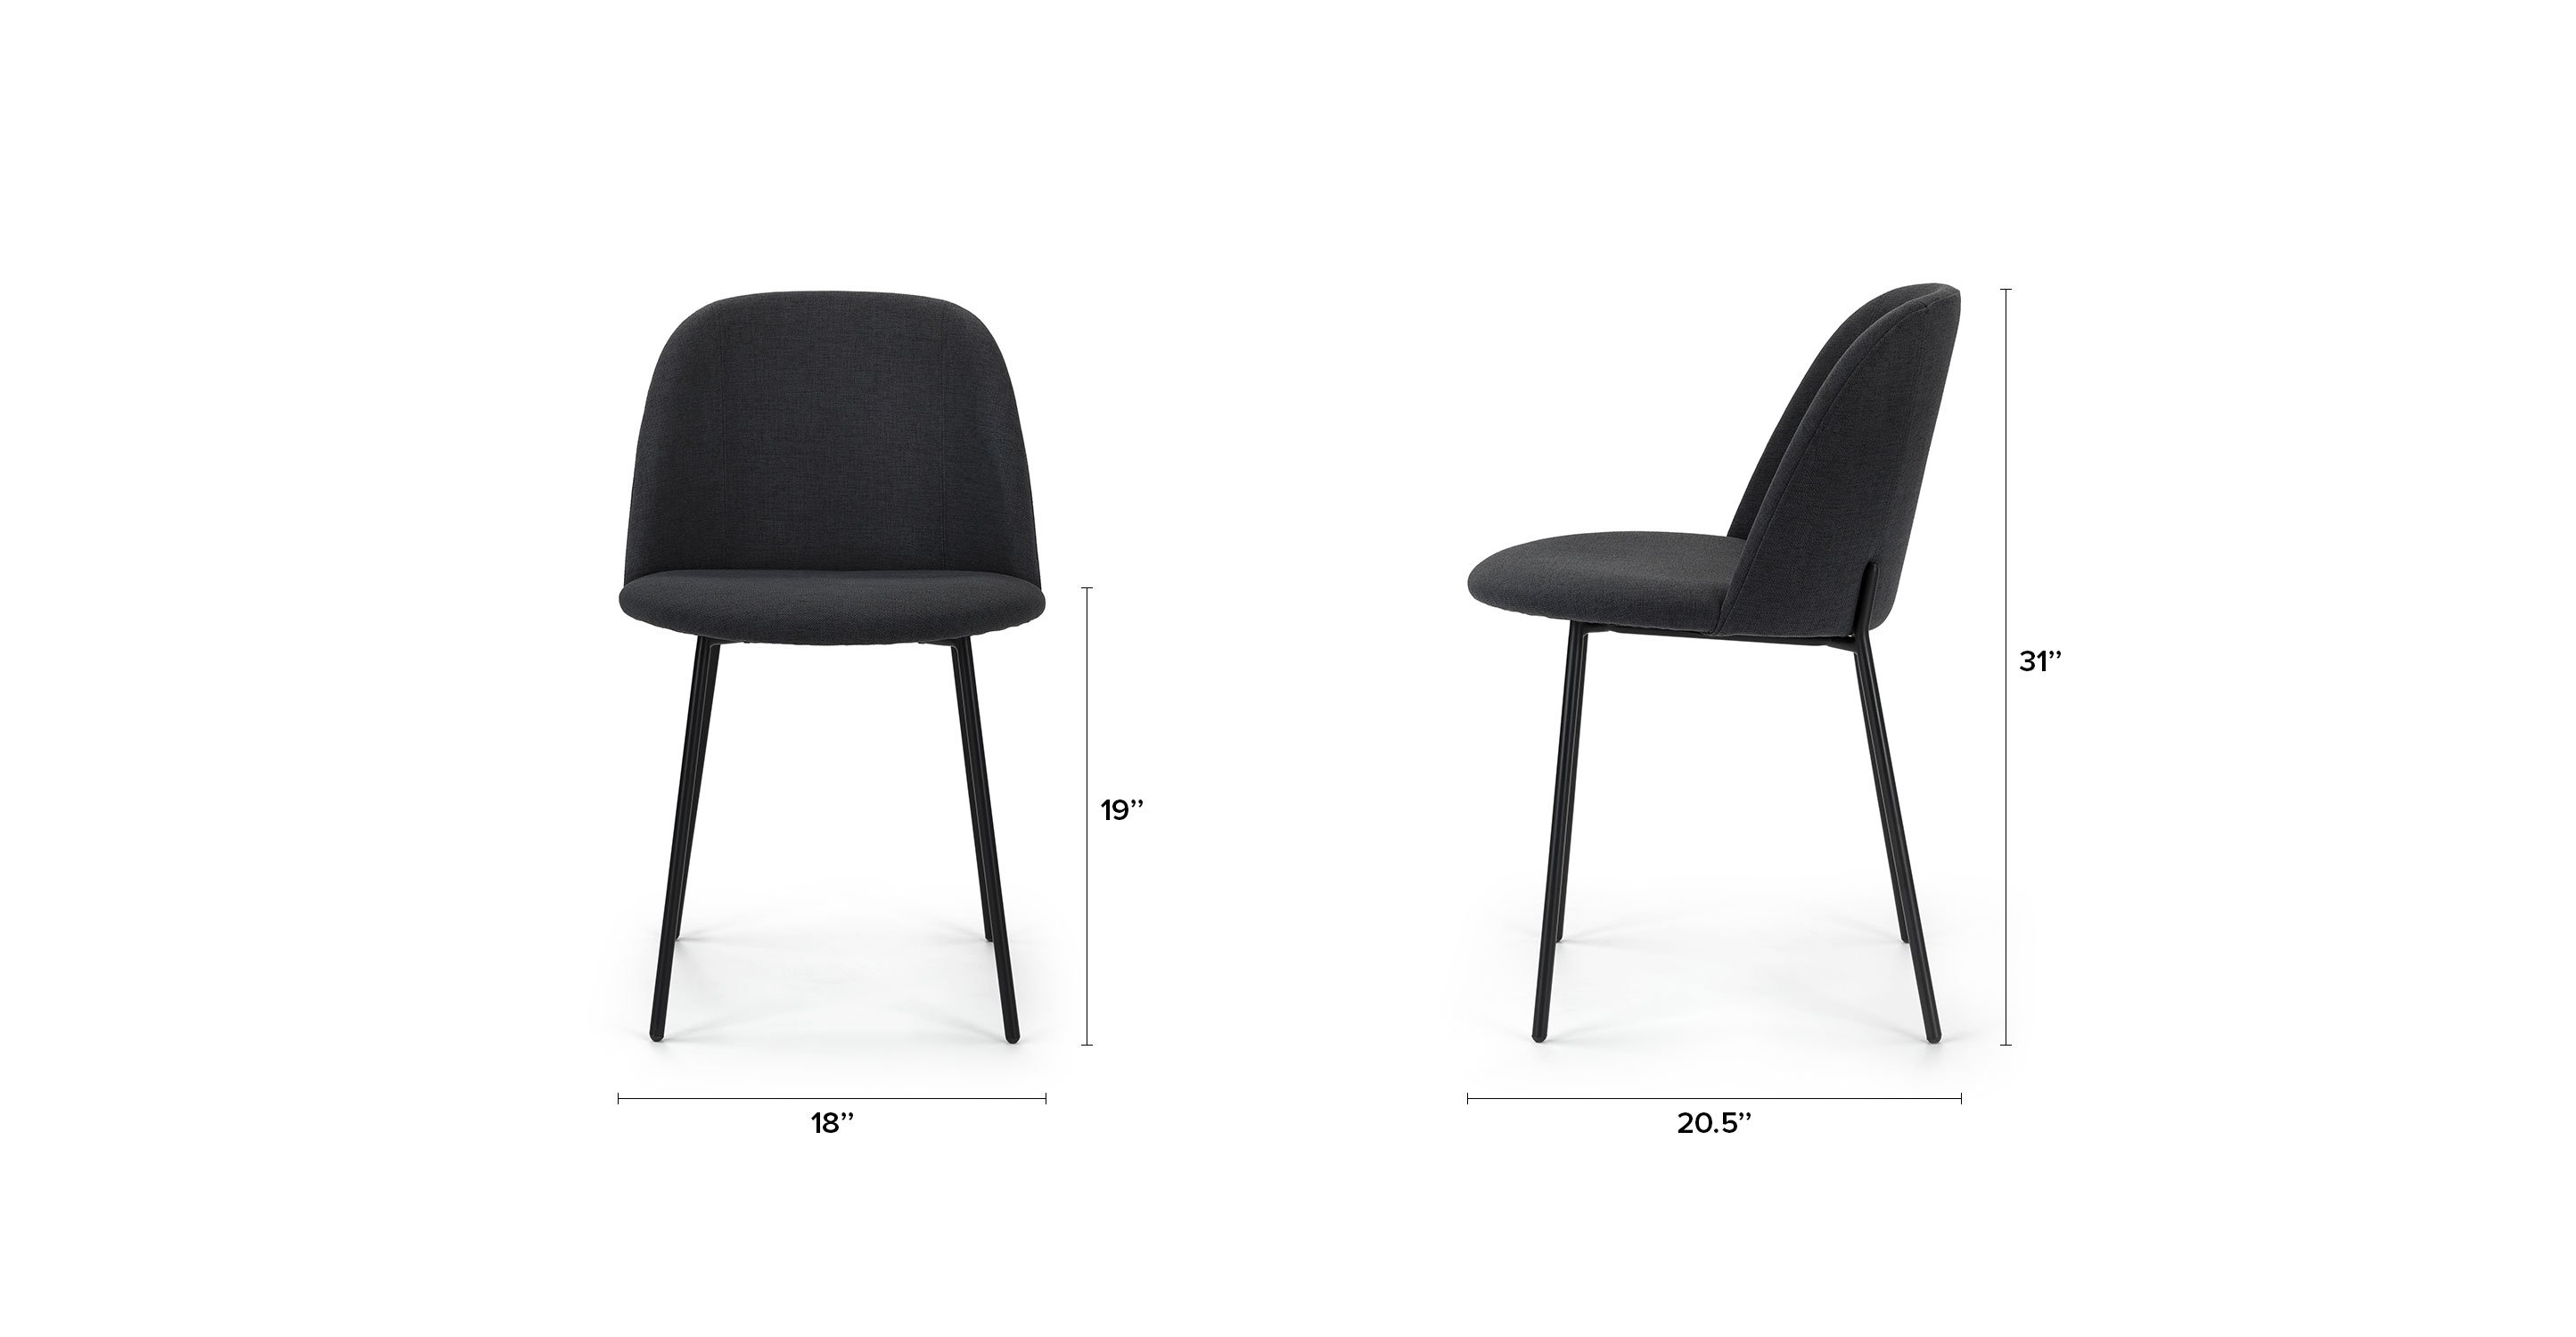 Ceres Flint Gray and Black Dining Chair, set of 2 - Image 4